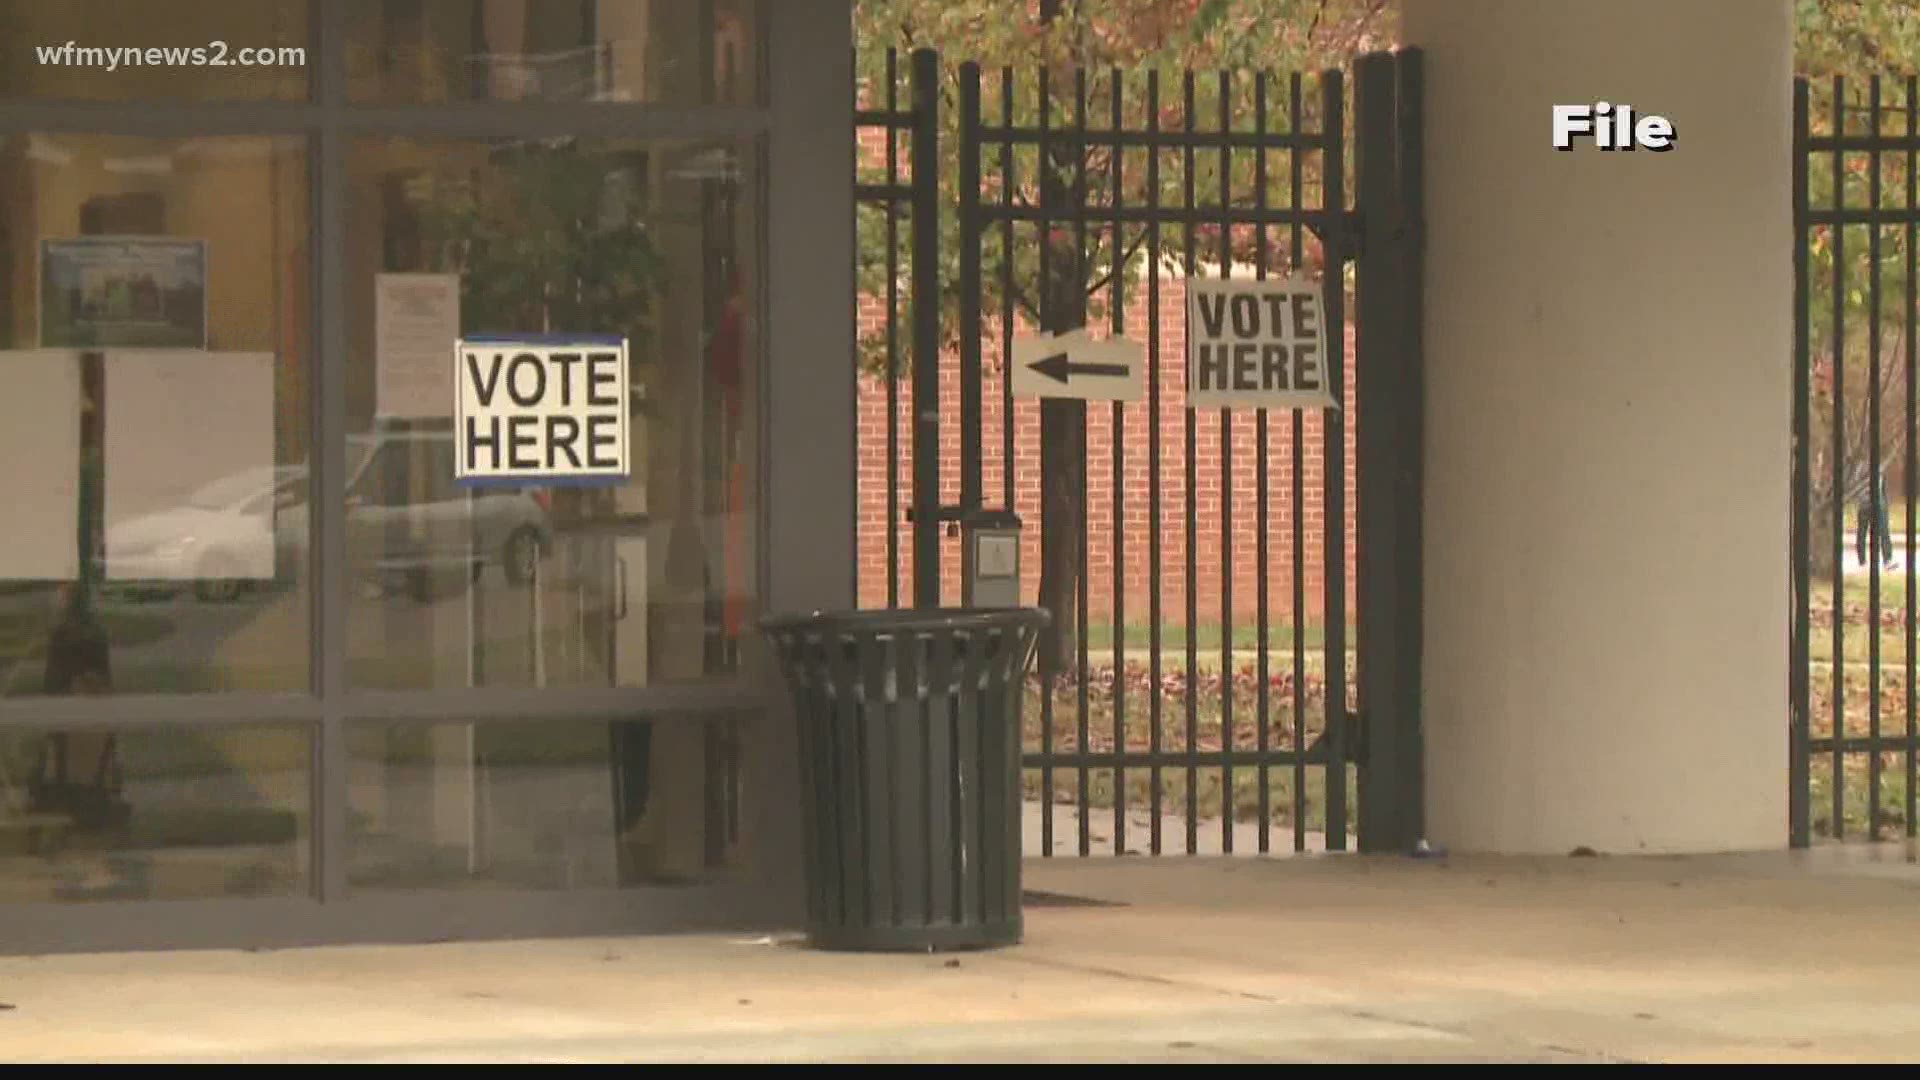 We have the step-by-step guide on what you can expect as absentee ballots begin to go out.